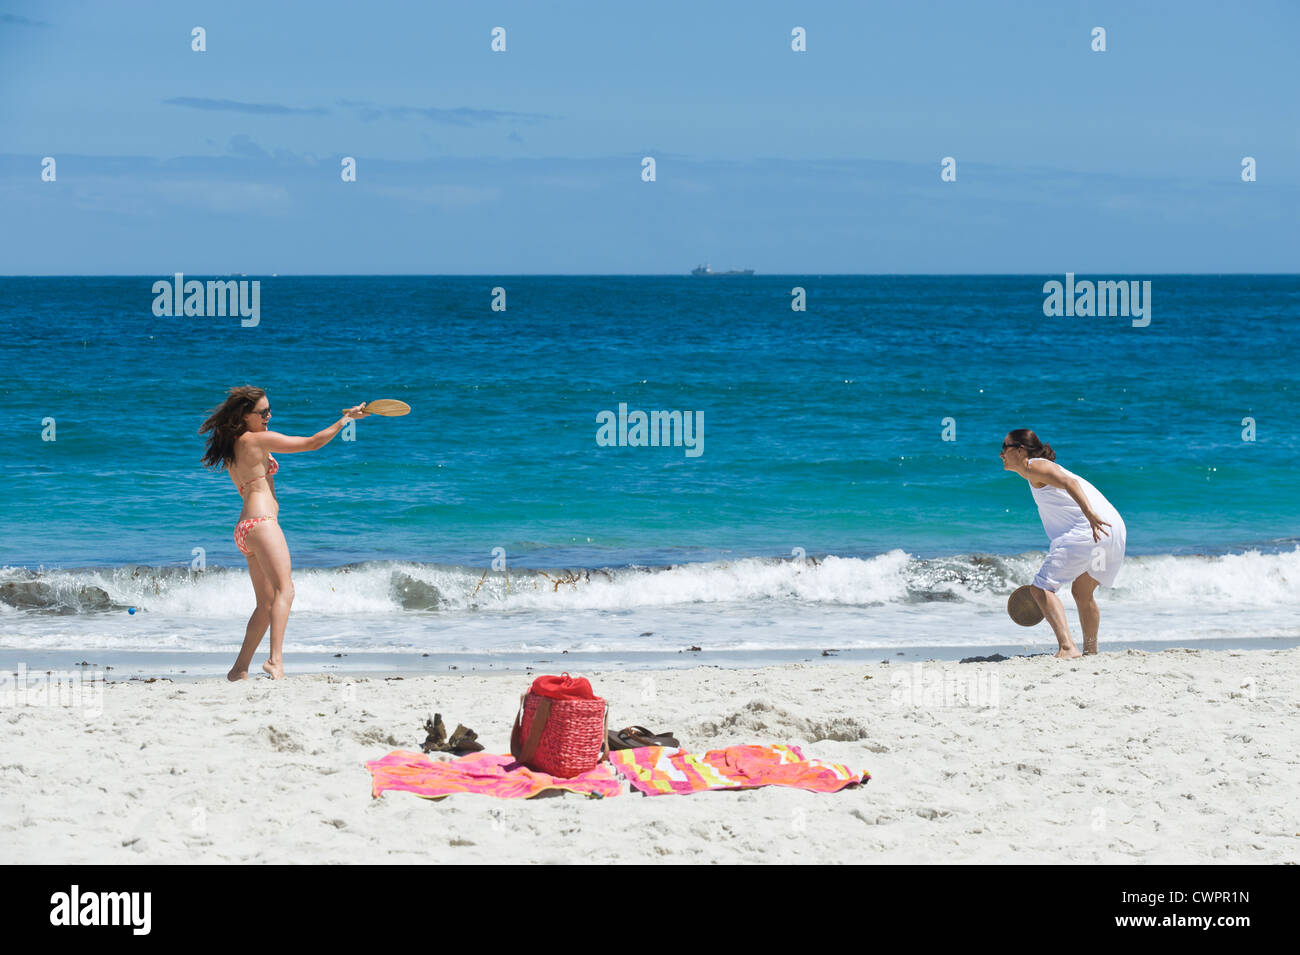 Women playing beach tennis, Camps Bay, Cape Town, South Africa Stock Photo